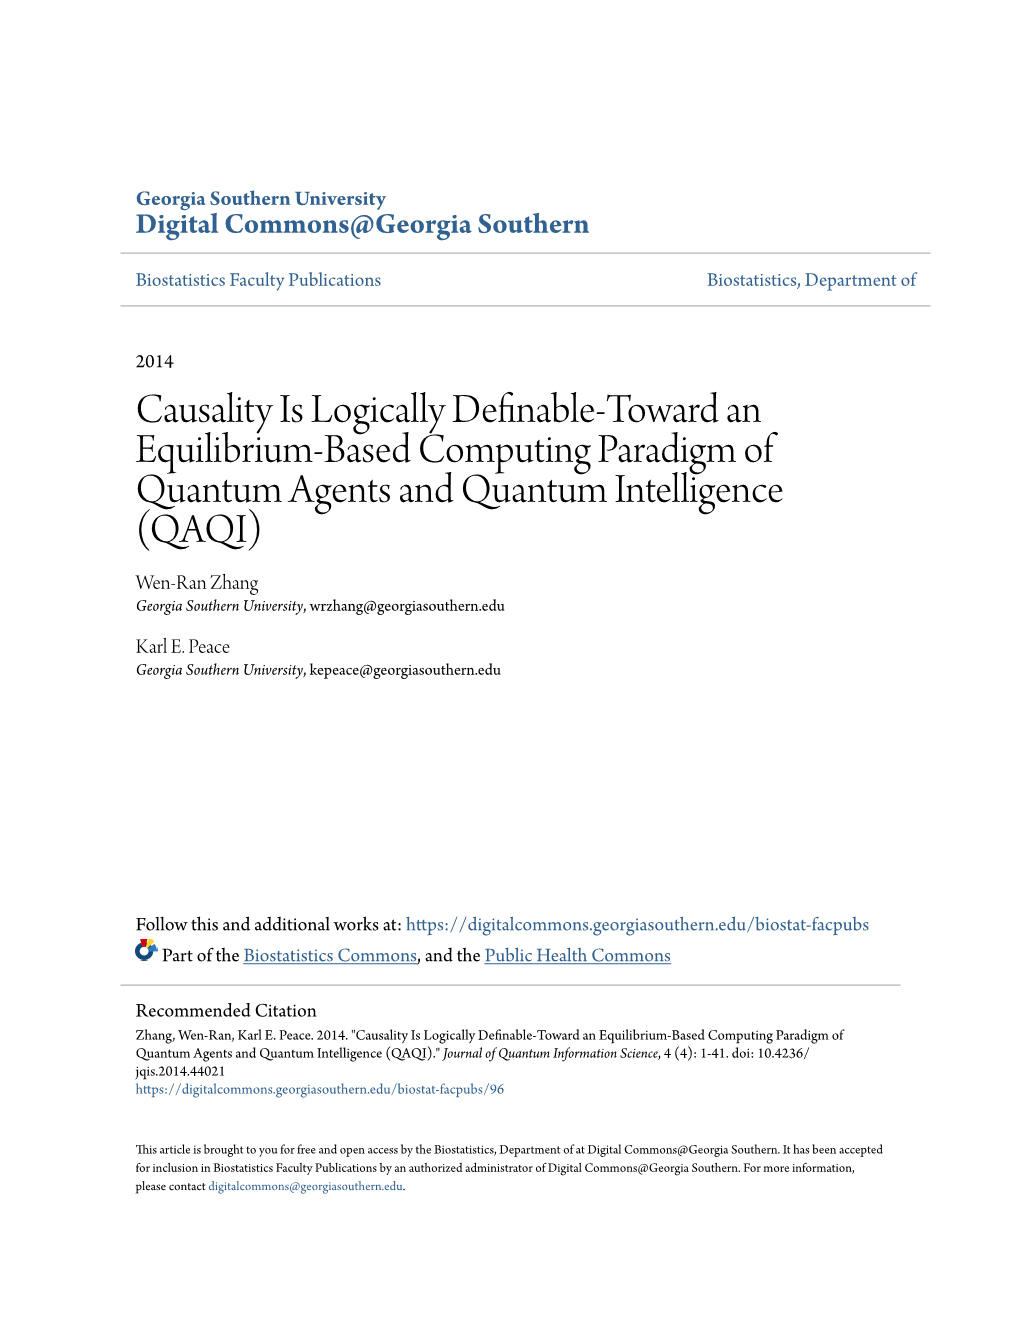 Causality Is Logically Definable-Toward an Equilibrium